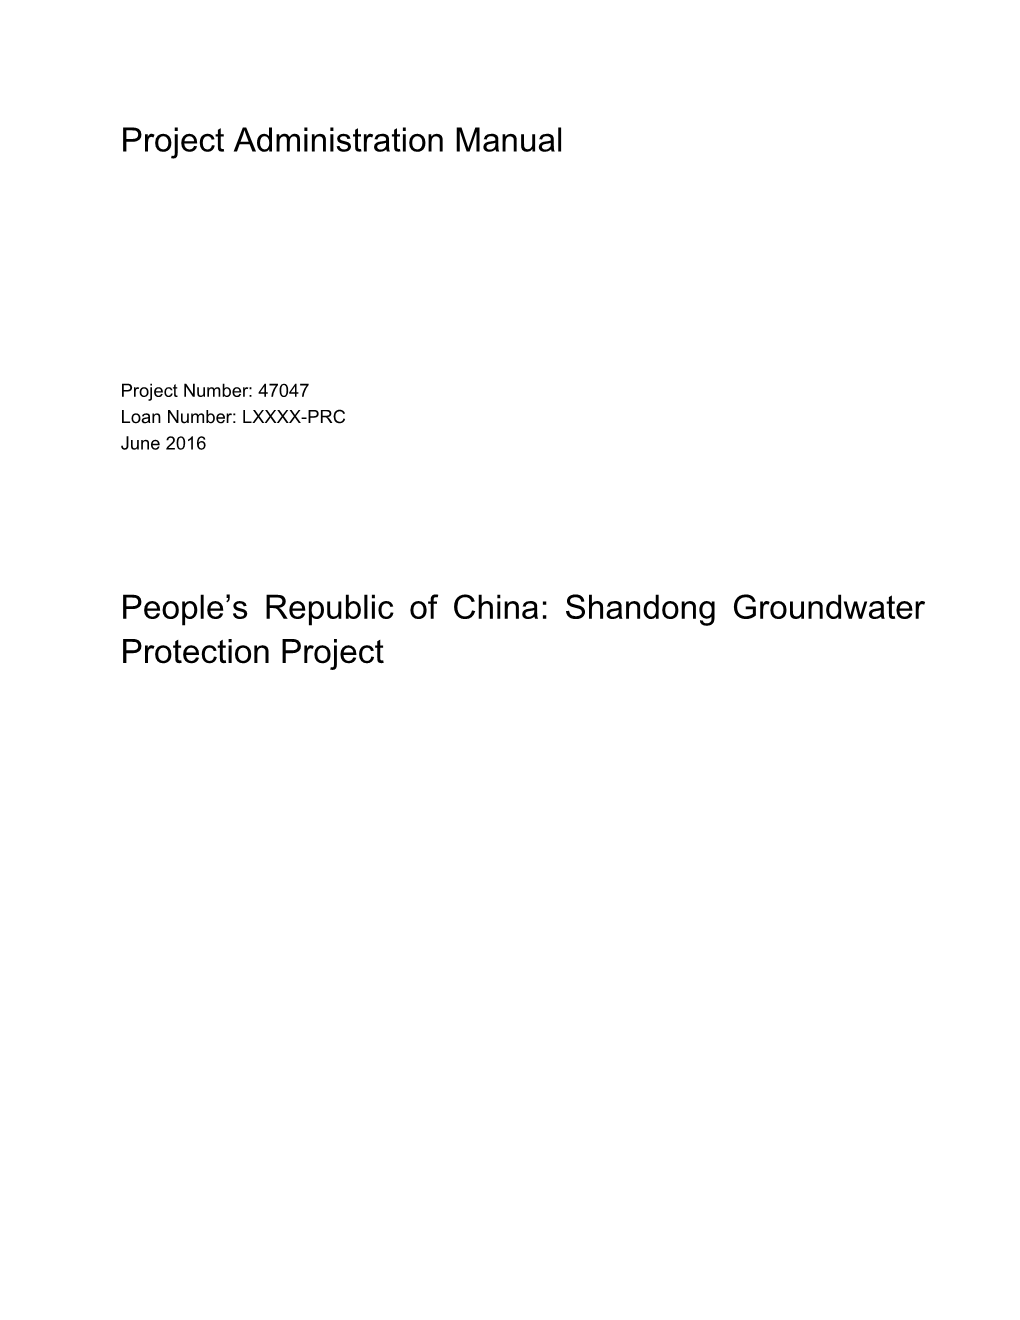 Shandong Groundwater Protection Project